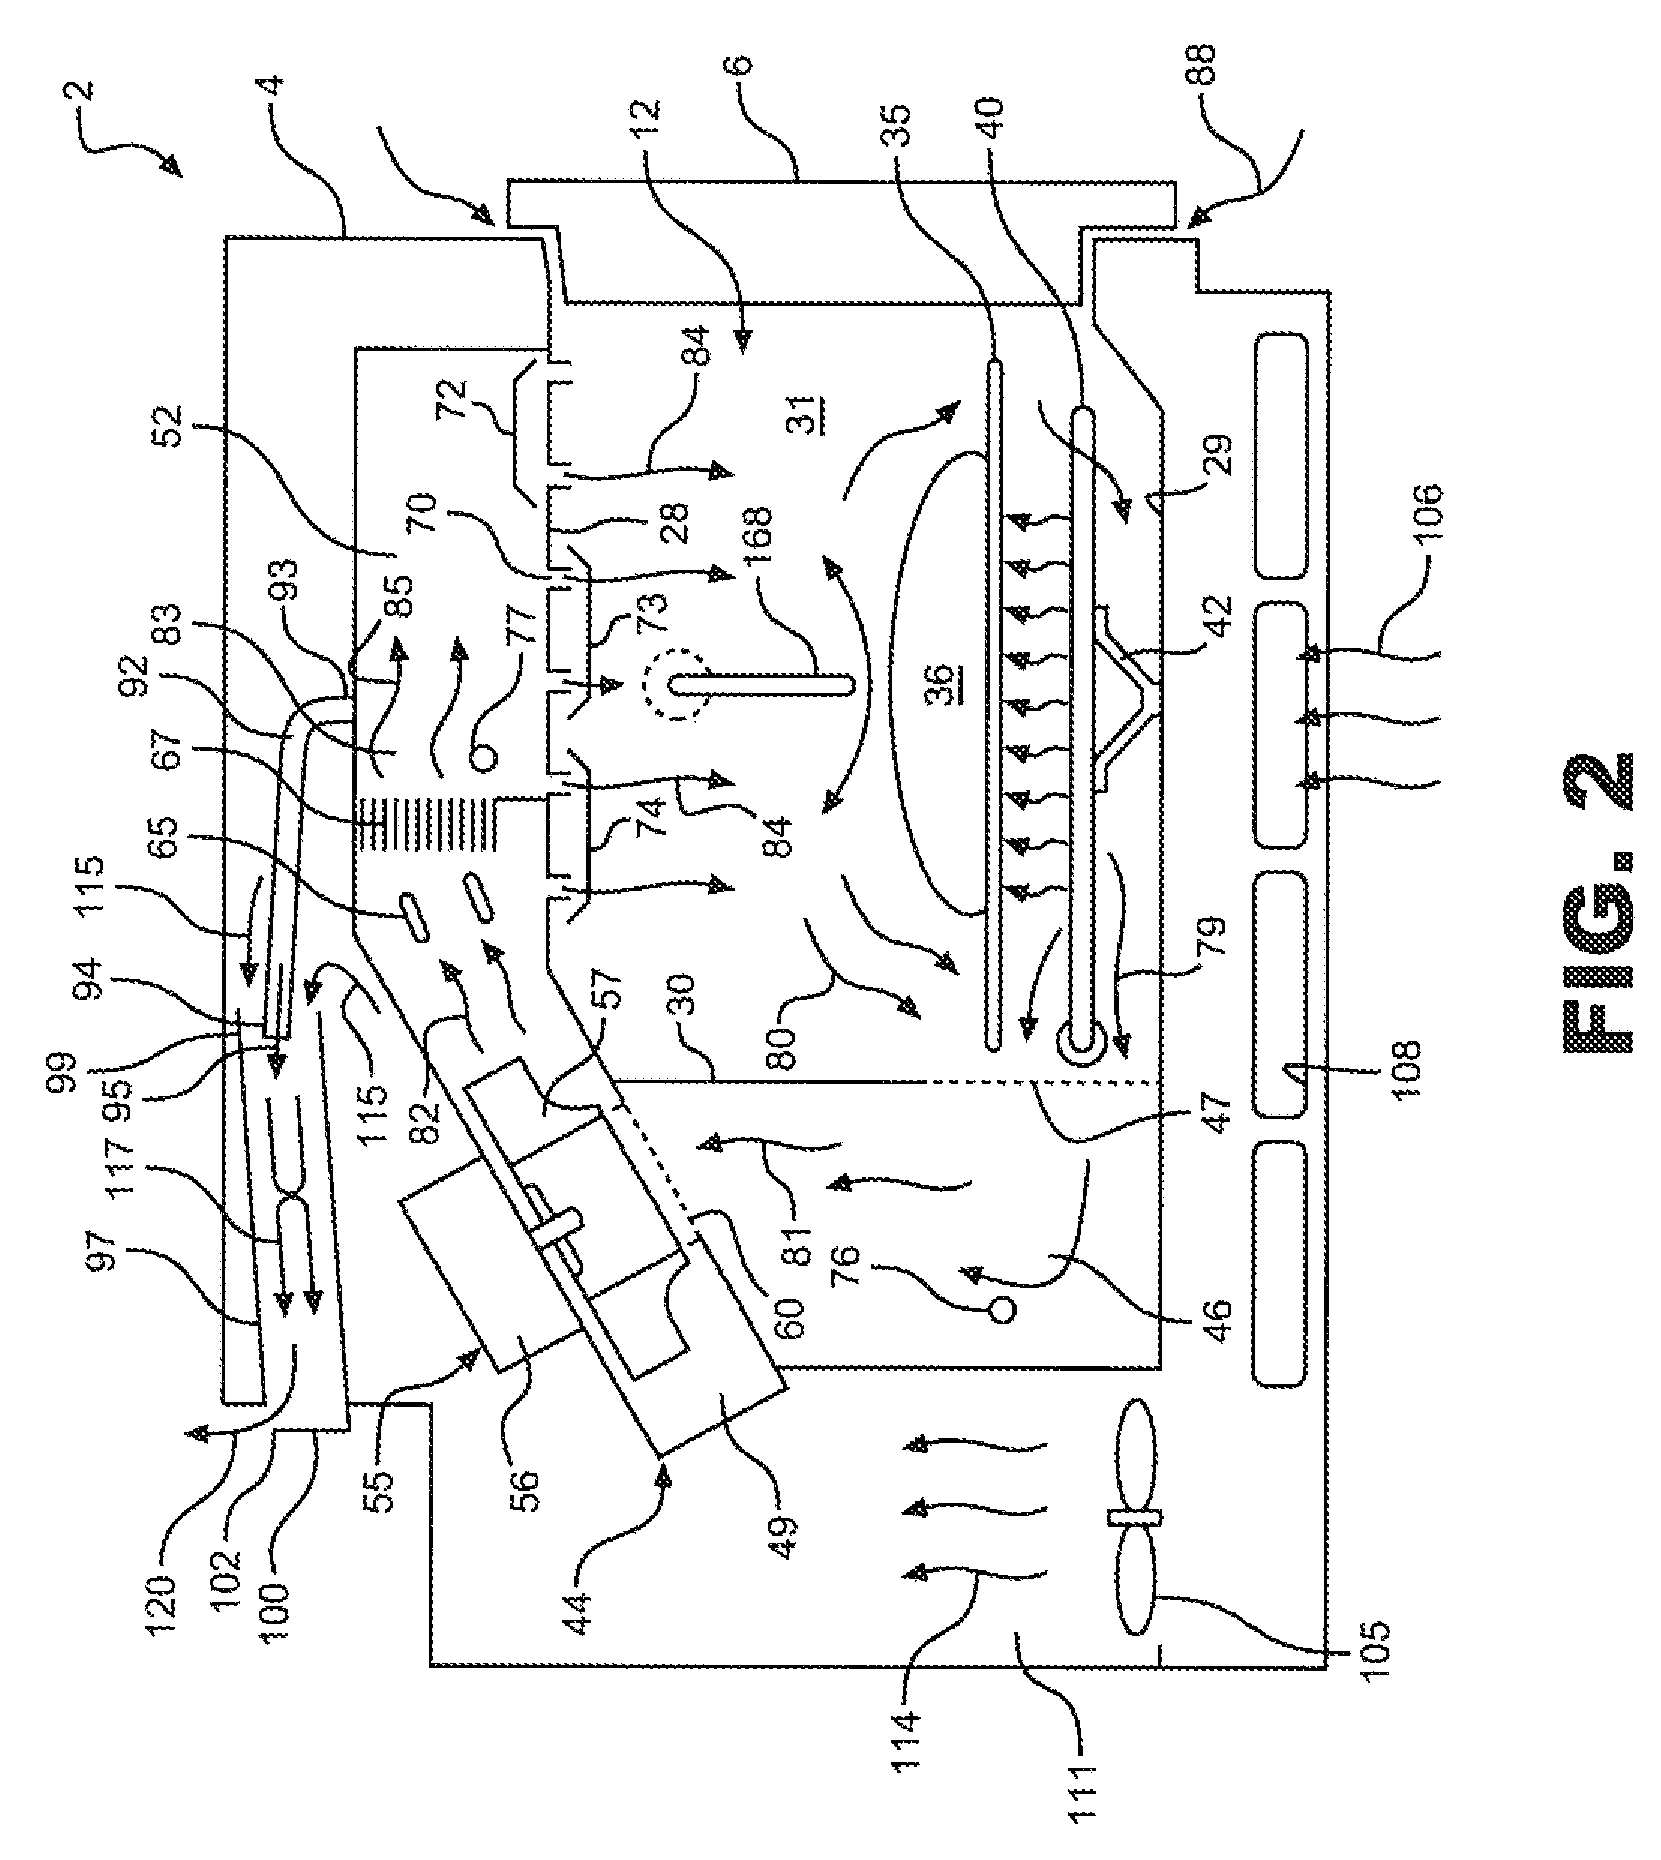 Temperature control for cooking appliance including combination heating system